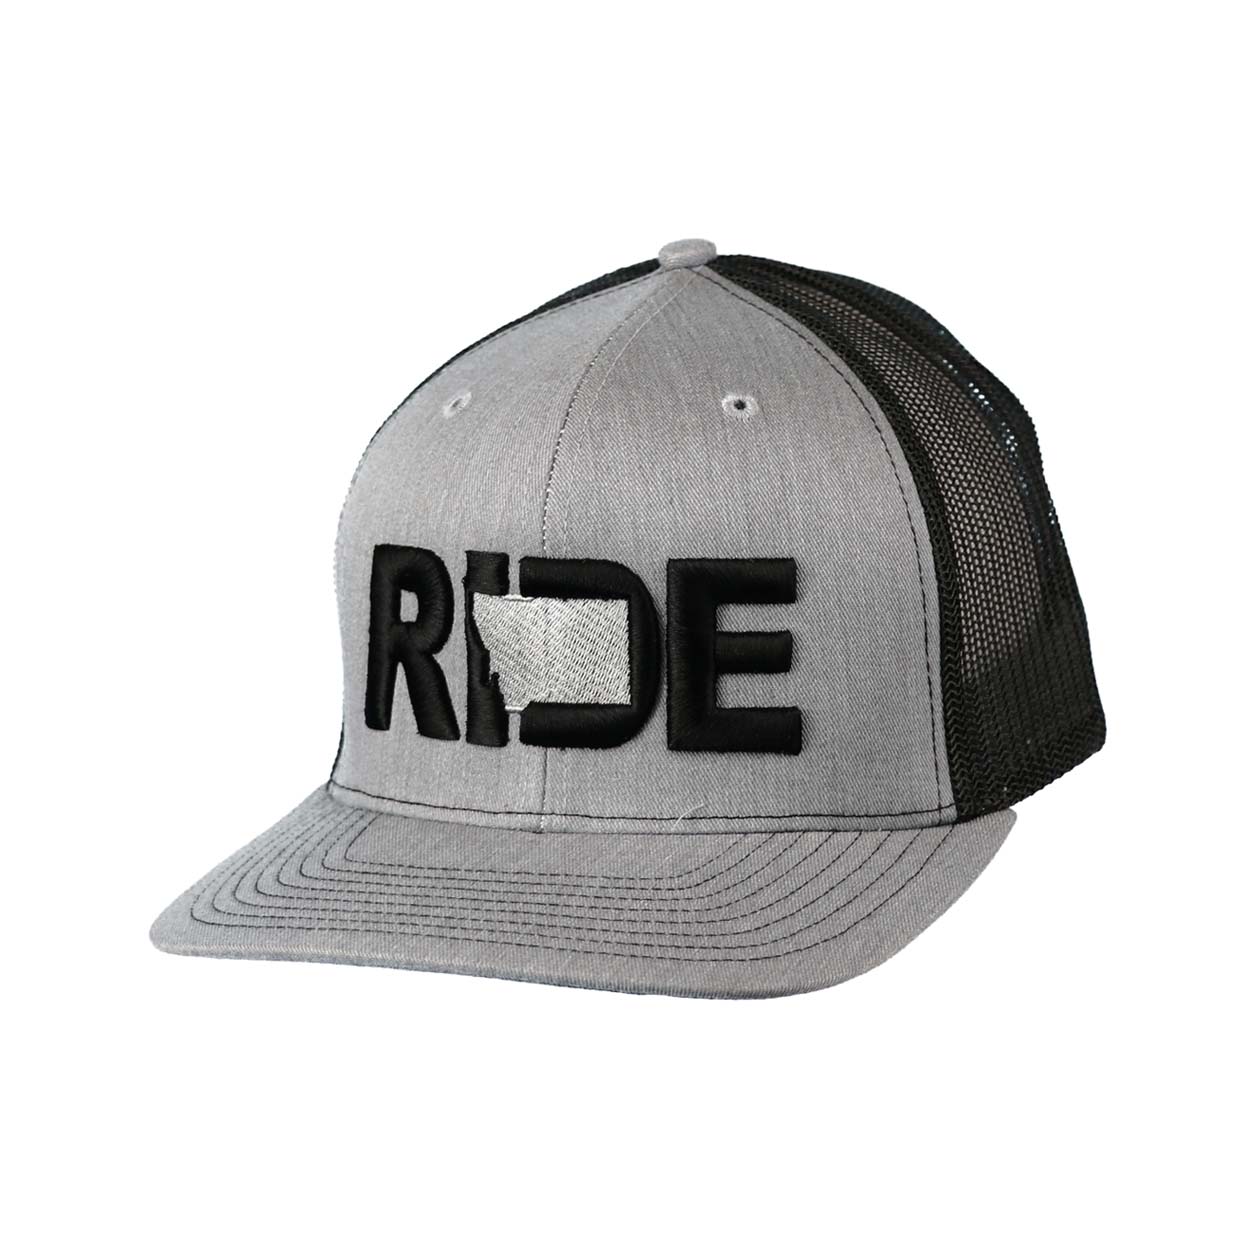 Ride Montana Classic Pro 3D Puff Embroidered Snapback Trucker Hat Heather Gray/Black